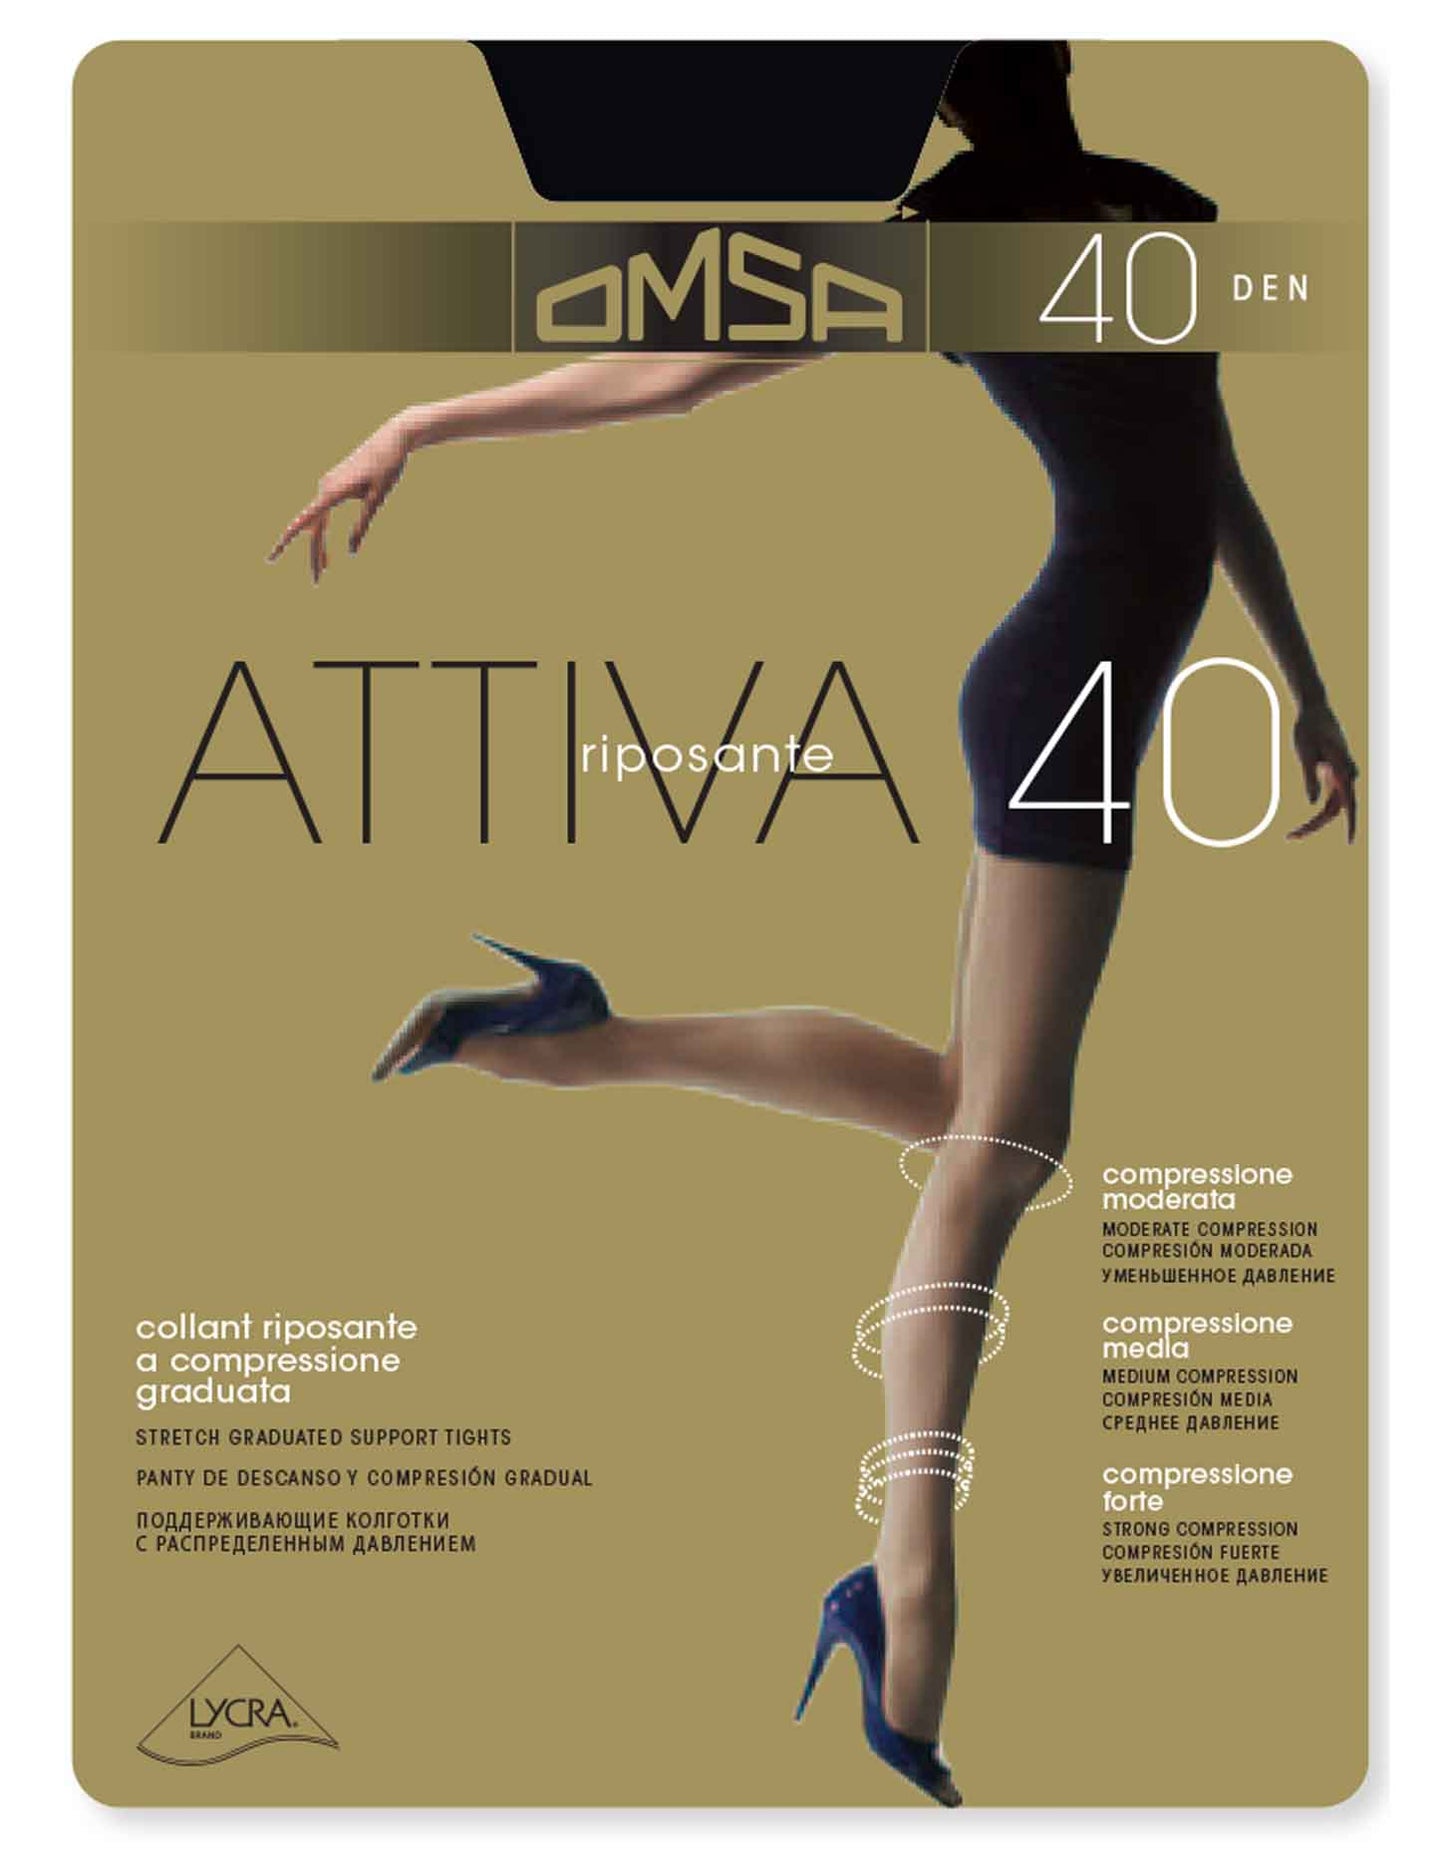 Omsa Attiva 40 light support tights, gradual compression, helps conceal cellulite, good for flights and being on your feet all day.